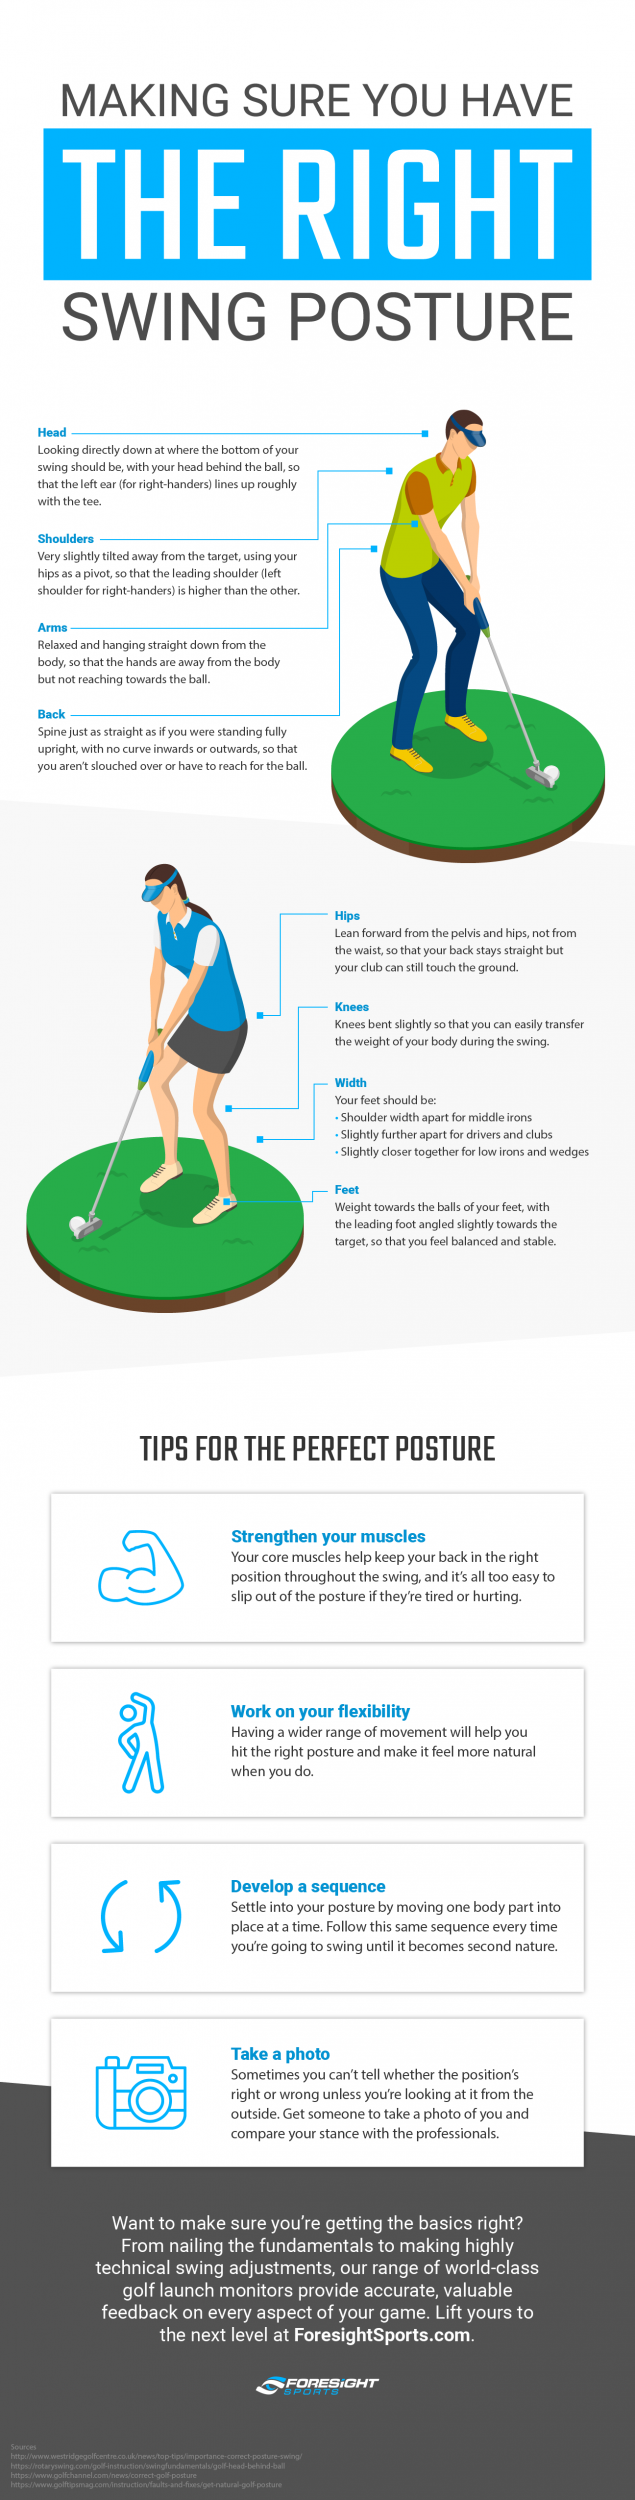 Making Sure You Have the Right Swing Posture (Infographic)